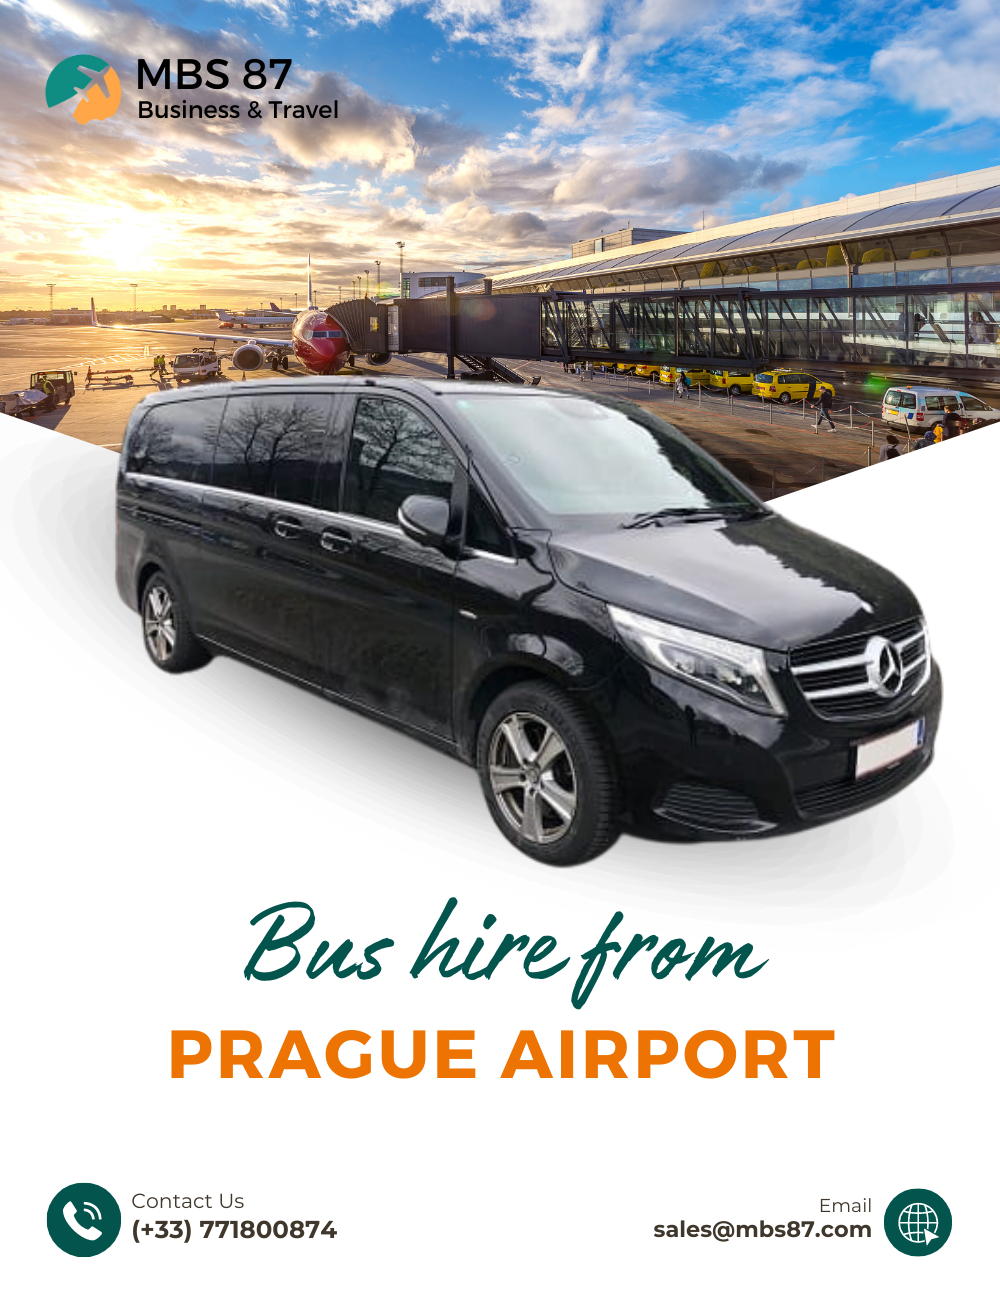 Bus rental for Europe trip from Prague Airport